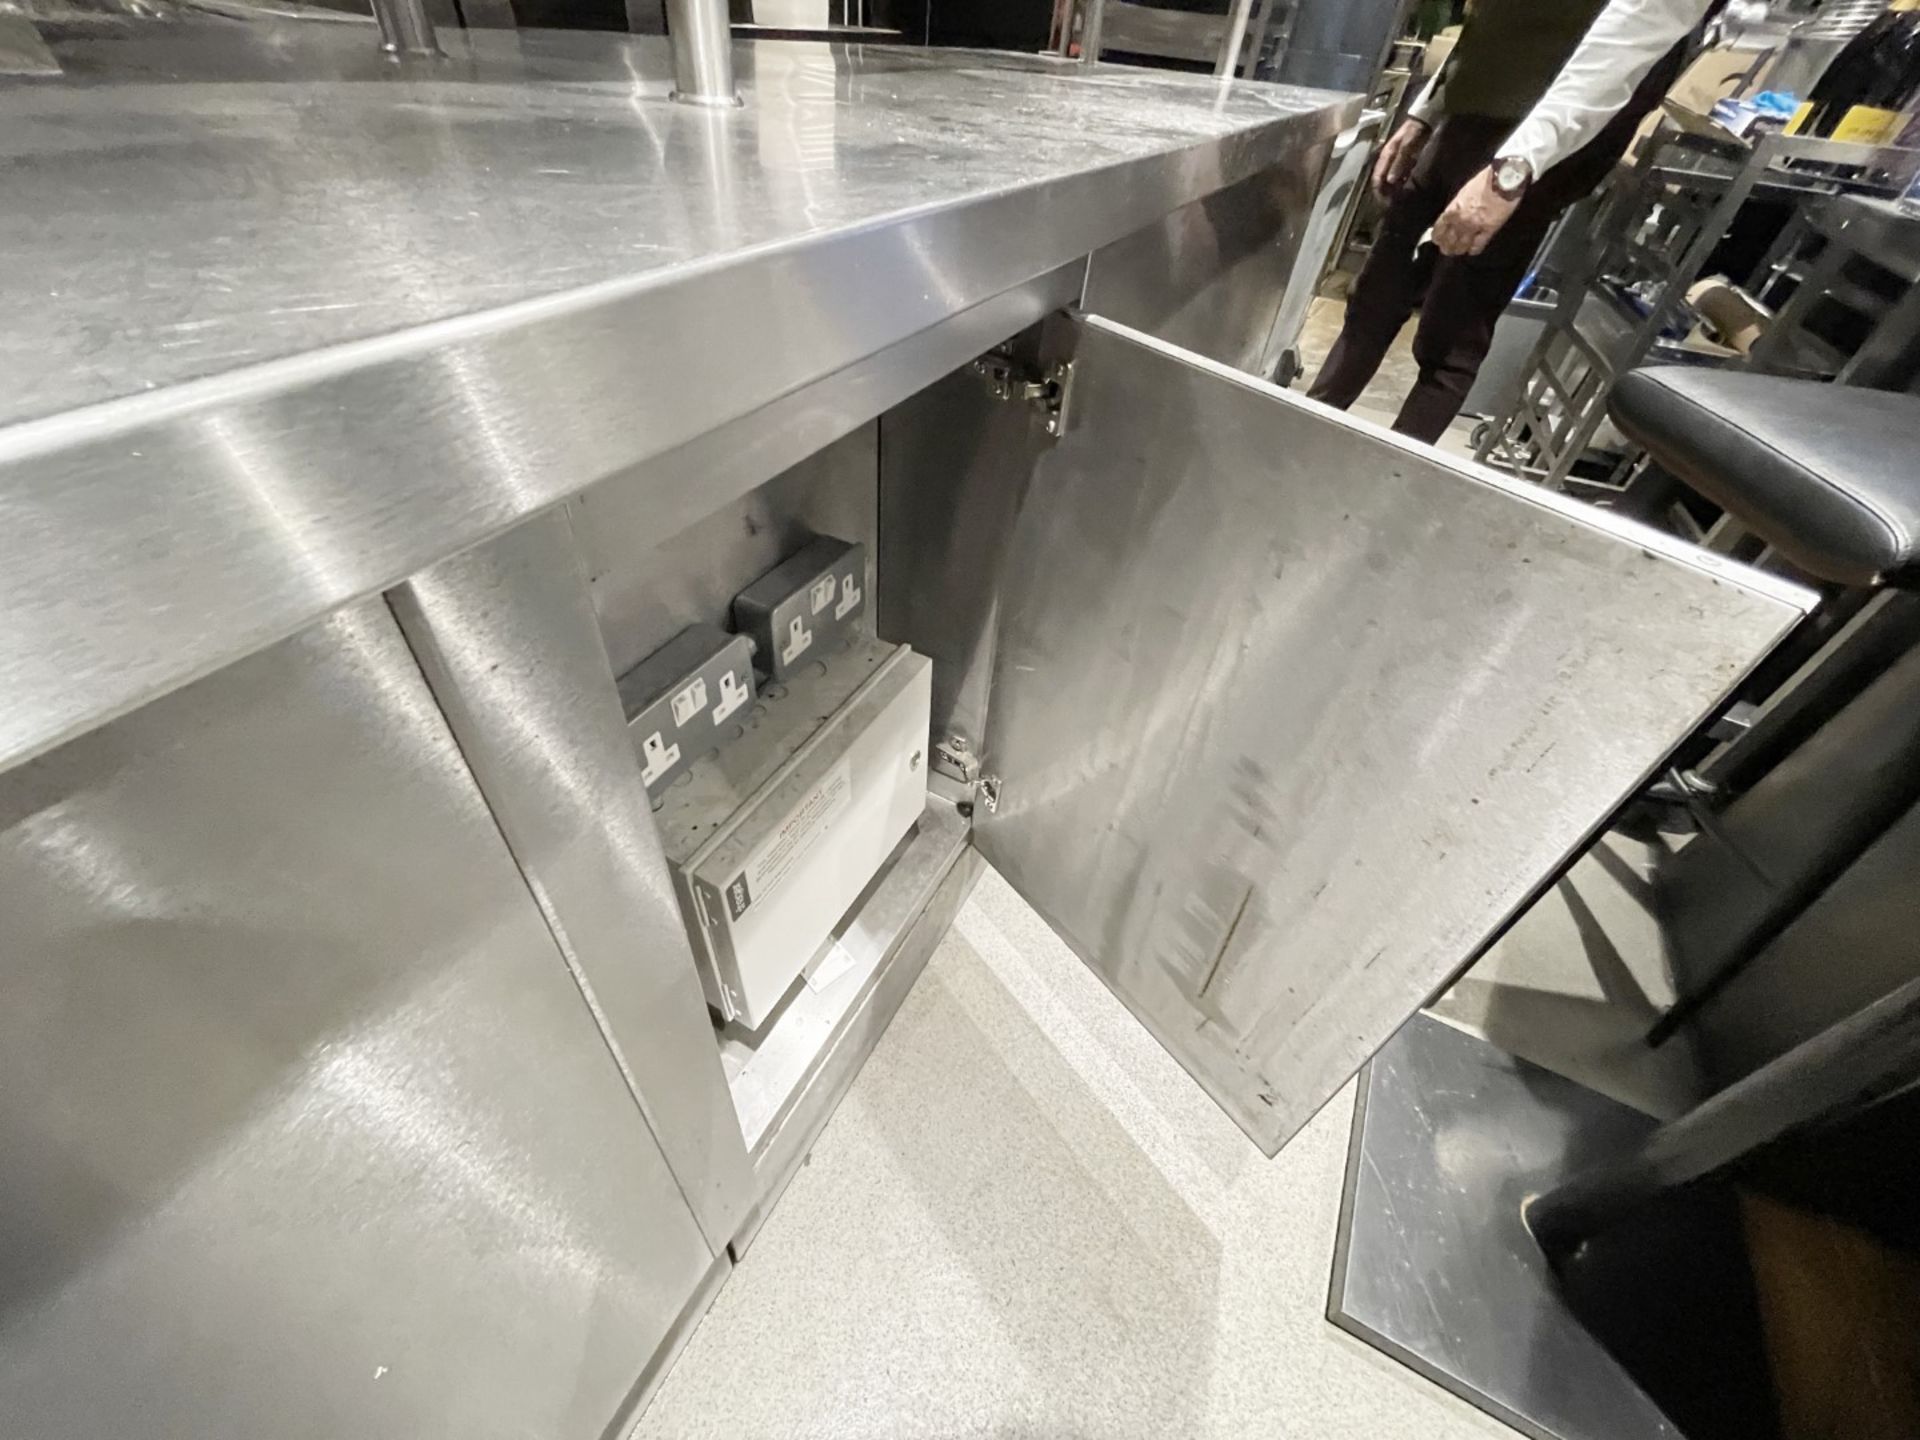 1 x Bespoke 15ft Commercial Kitchen Preparation Island with a Stainless Steel Construction - Image 8 of 15